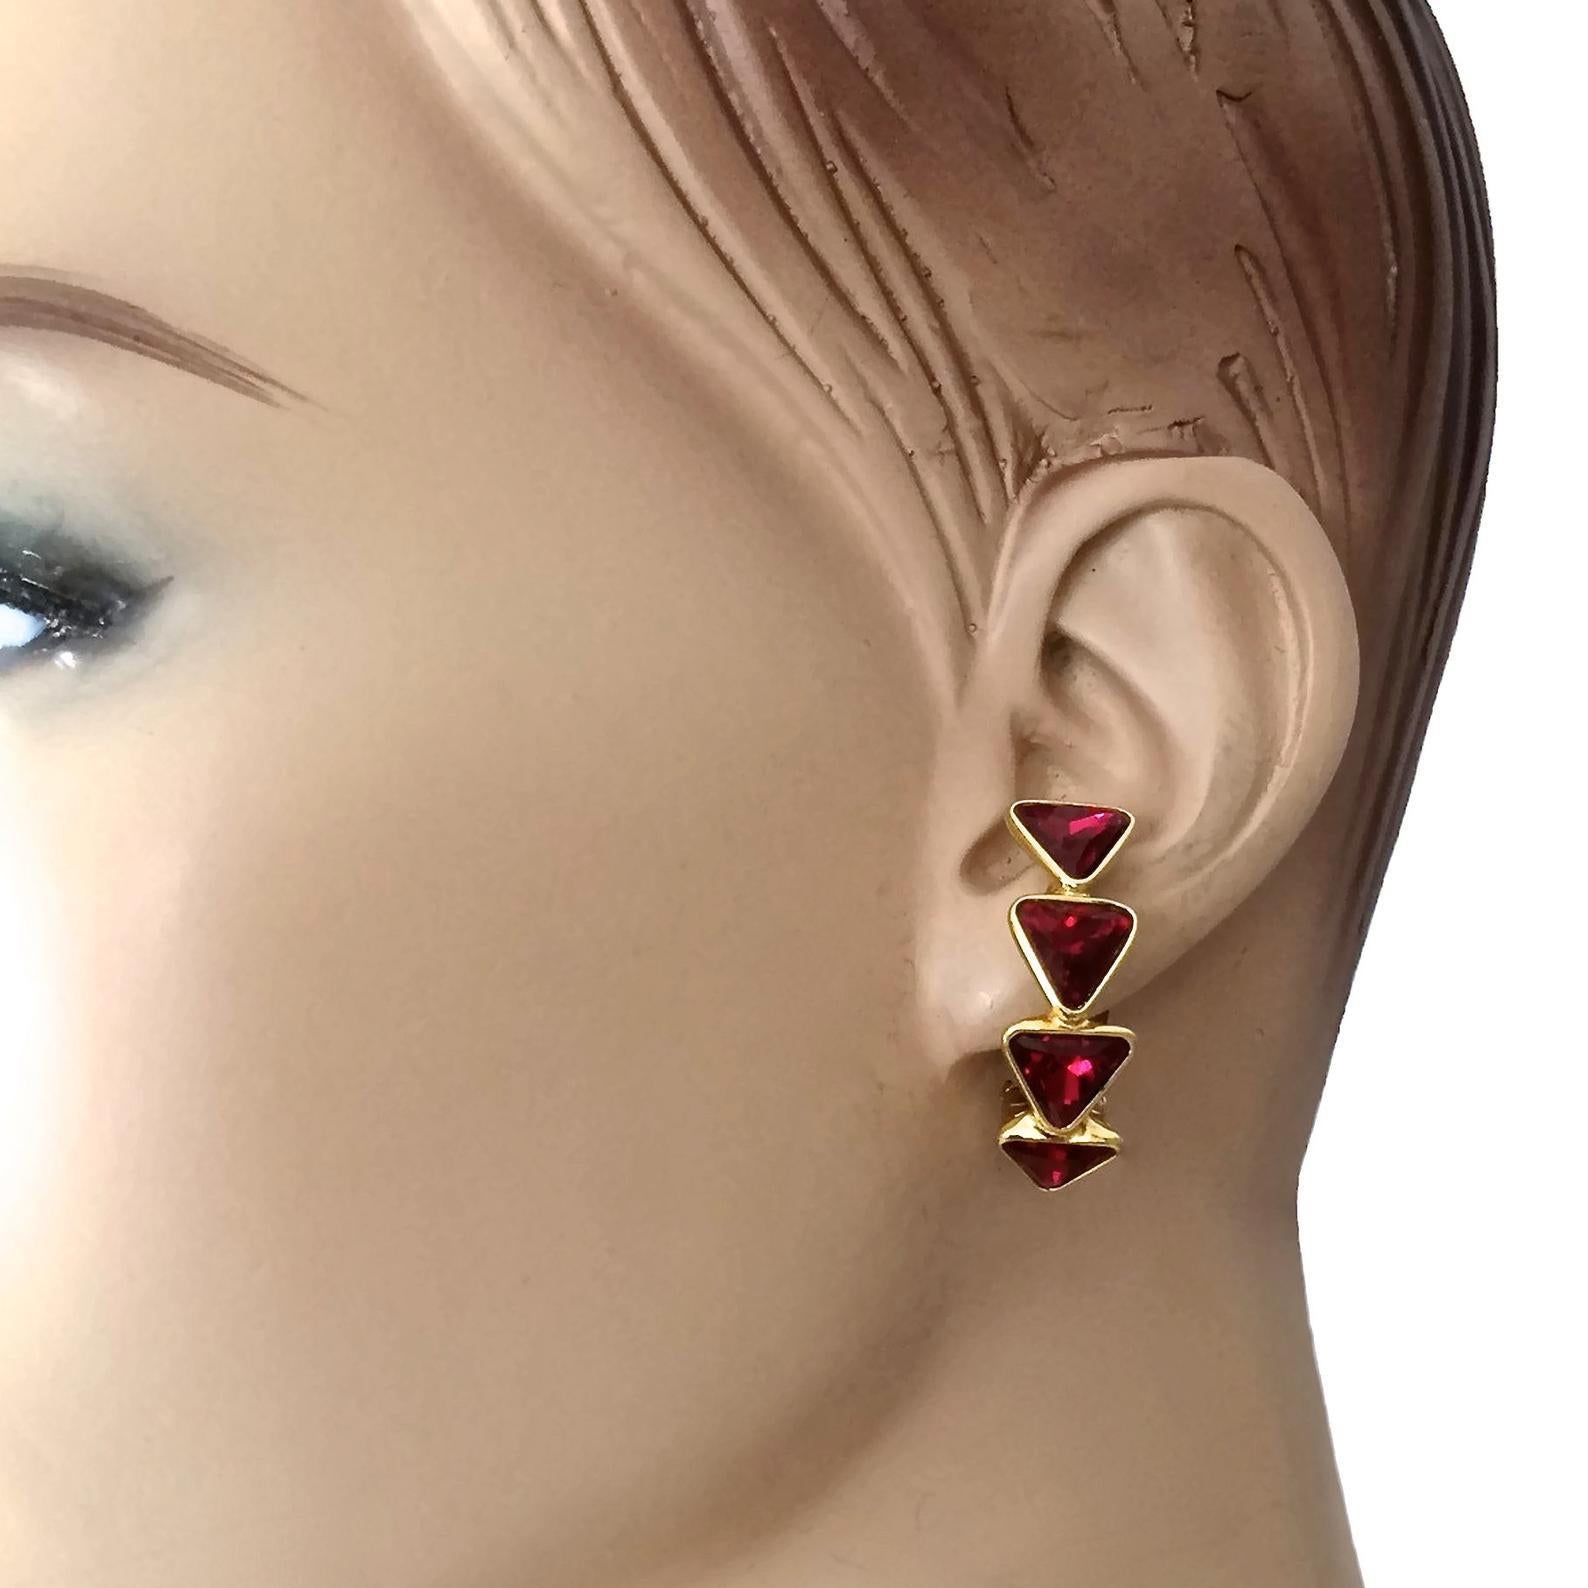 Vintage YVES SAINT LAURENT Ysl Geometric Ruby Rhinestone Earrings

Measurements:
Height: 1.29 inches (3.3 cm)
Width: 0.39 inch (1 cm)
Weight: 7 grams

Features:
- 100% Authentic YVES SAINT LAURENT.
- Geometric triangle ruby rhinestones.
- Gold